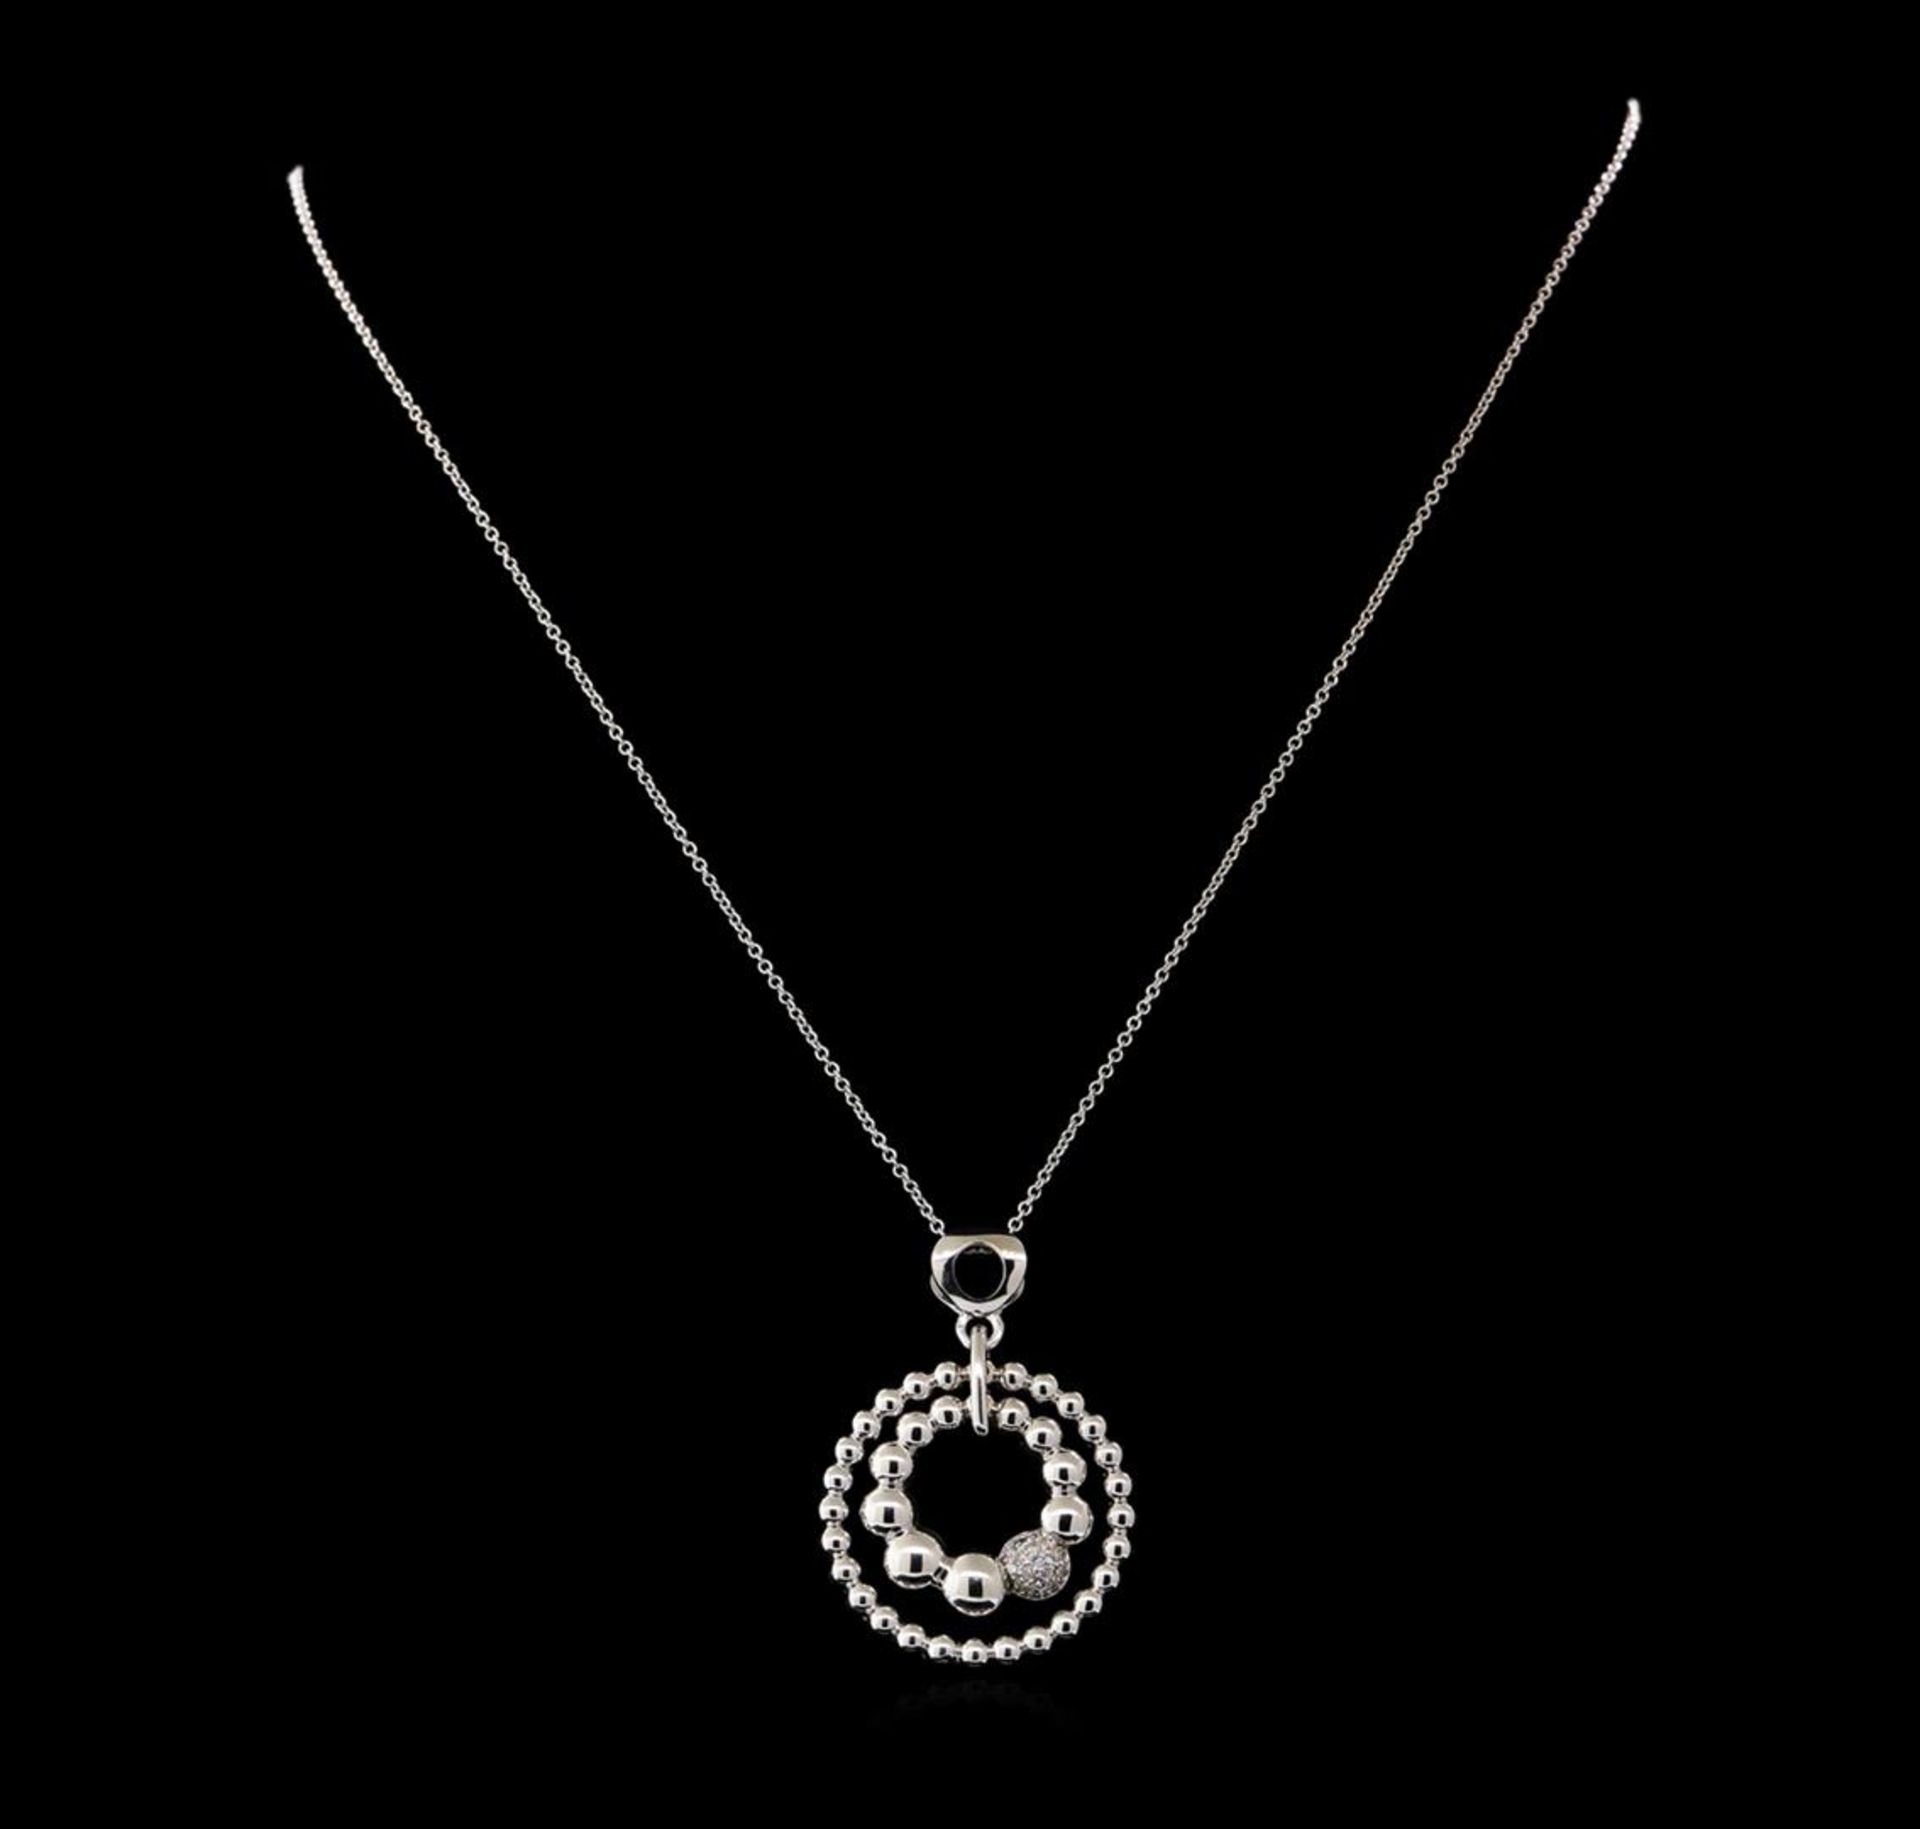 0.12 ctw Diamond Pendant With Chain - 14KT White Gold - Image 2 of 3